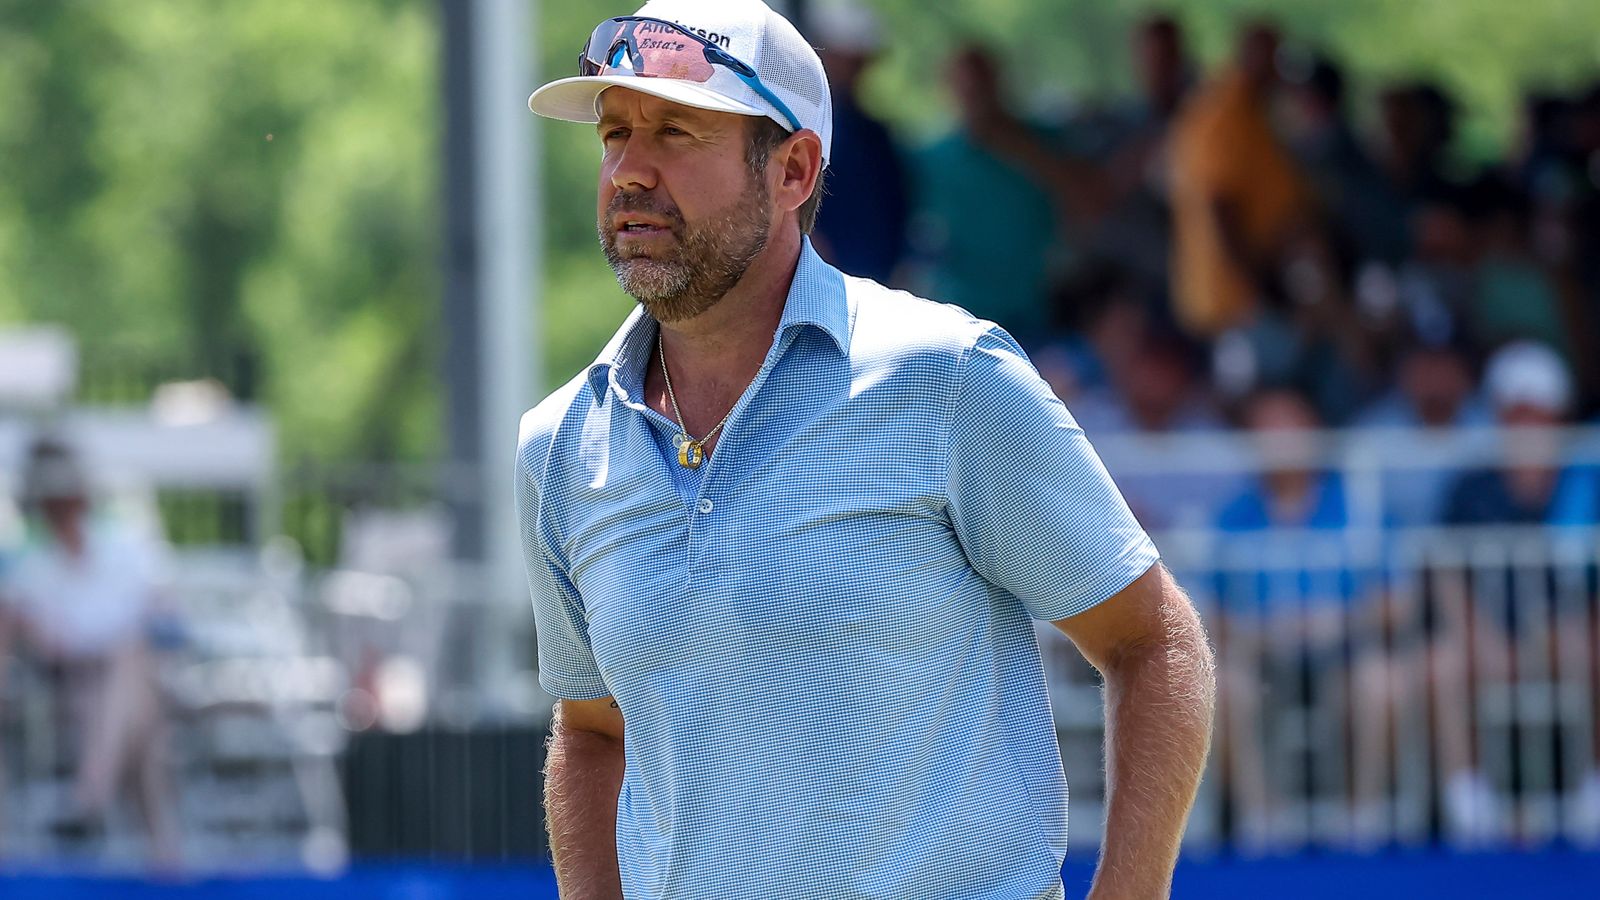 Erik Compton: Heart transplant golfer charged after 'pushing wife against wall', Miami police say